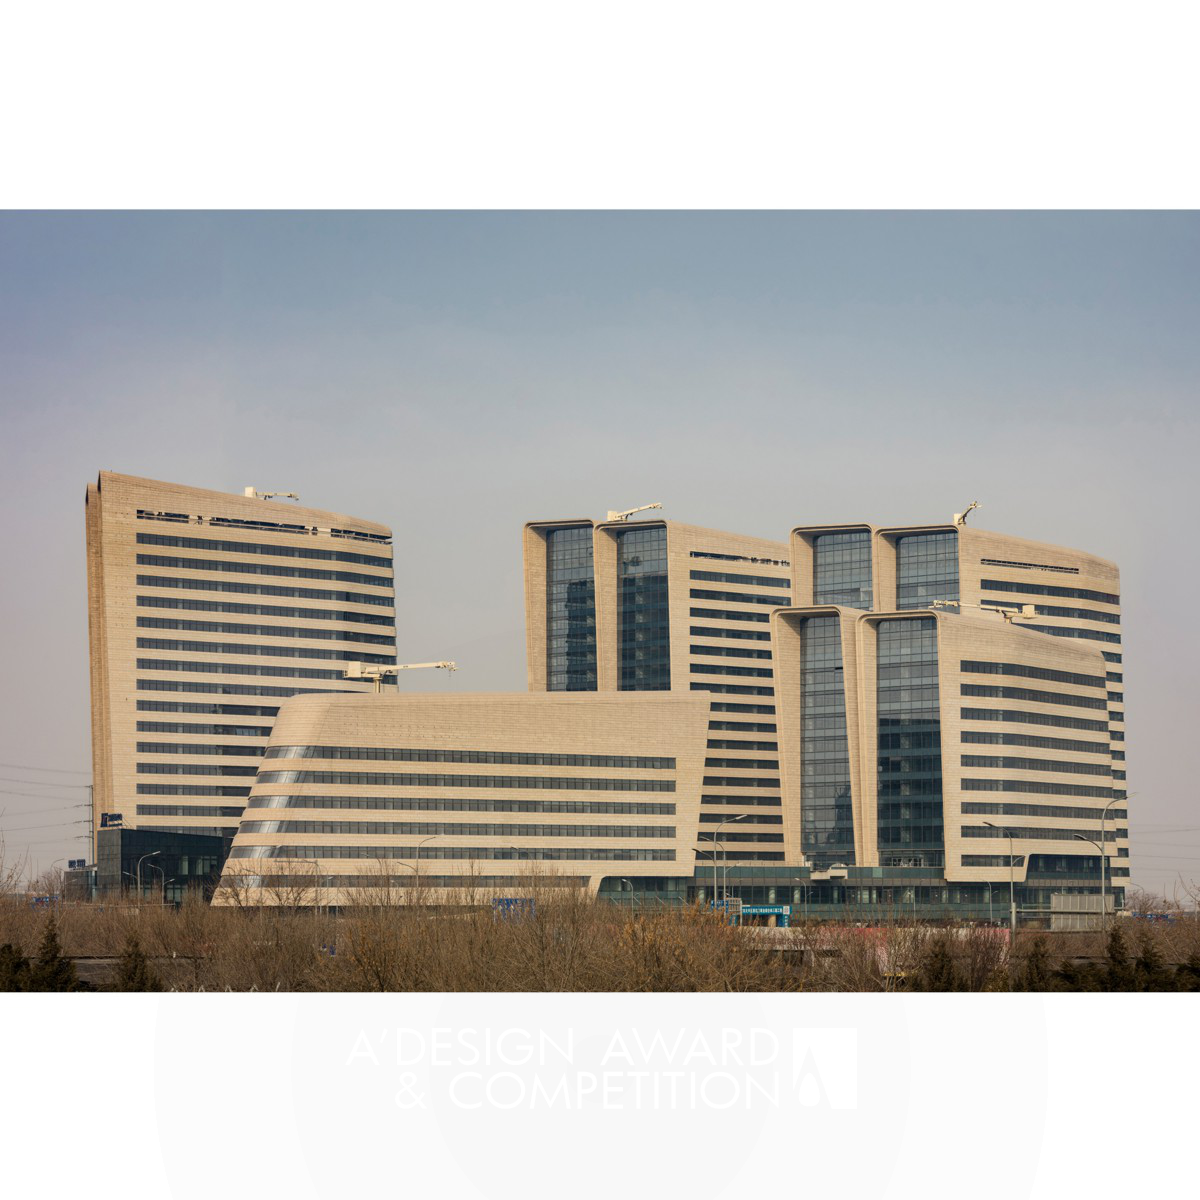 Daxing District P3 <b>Office, Hotel and Retail